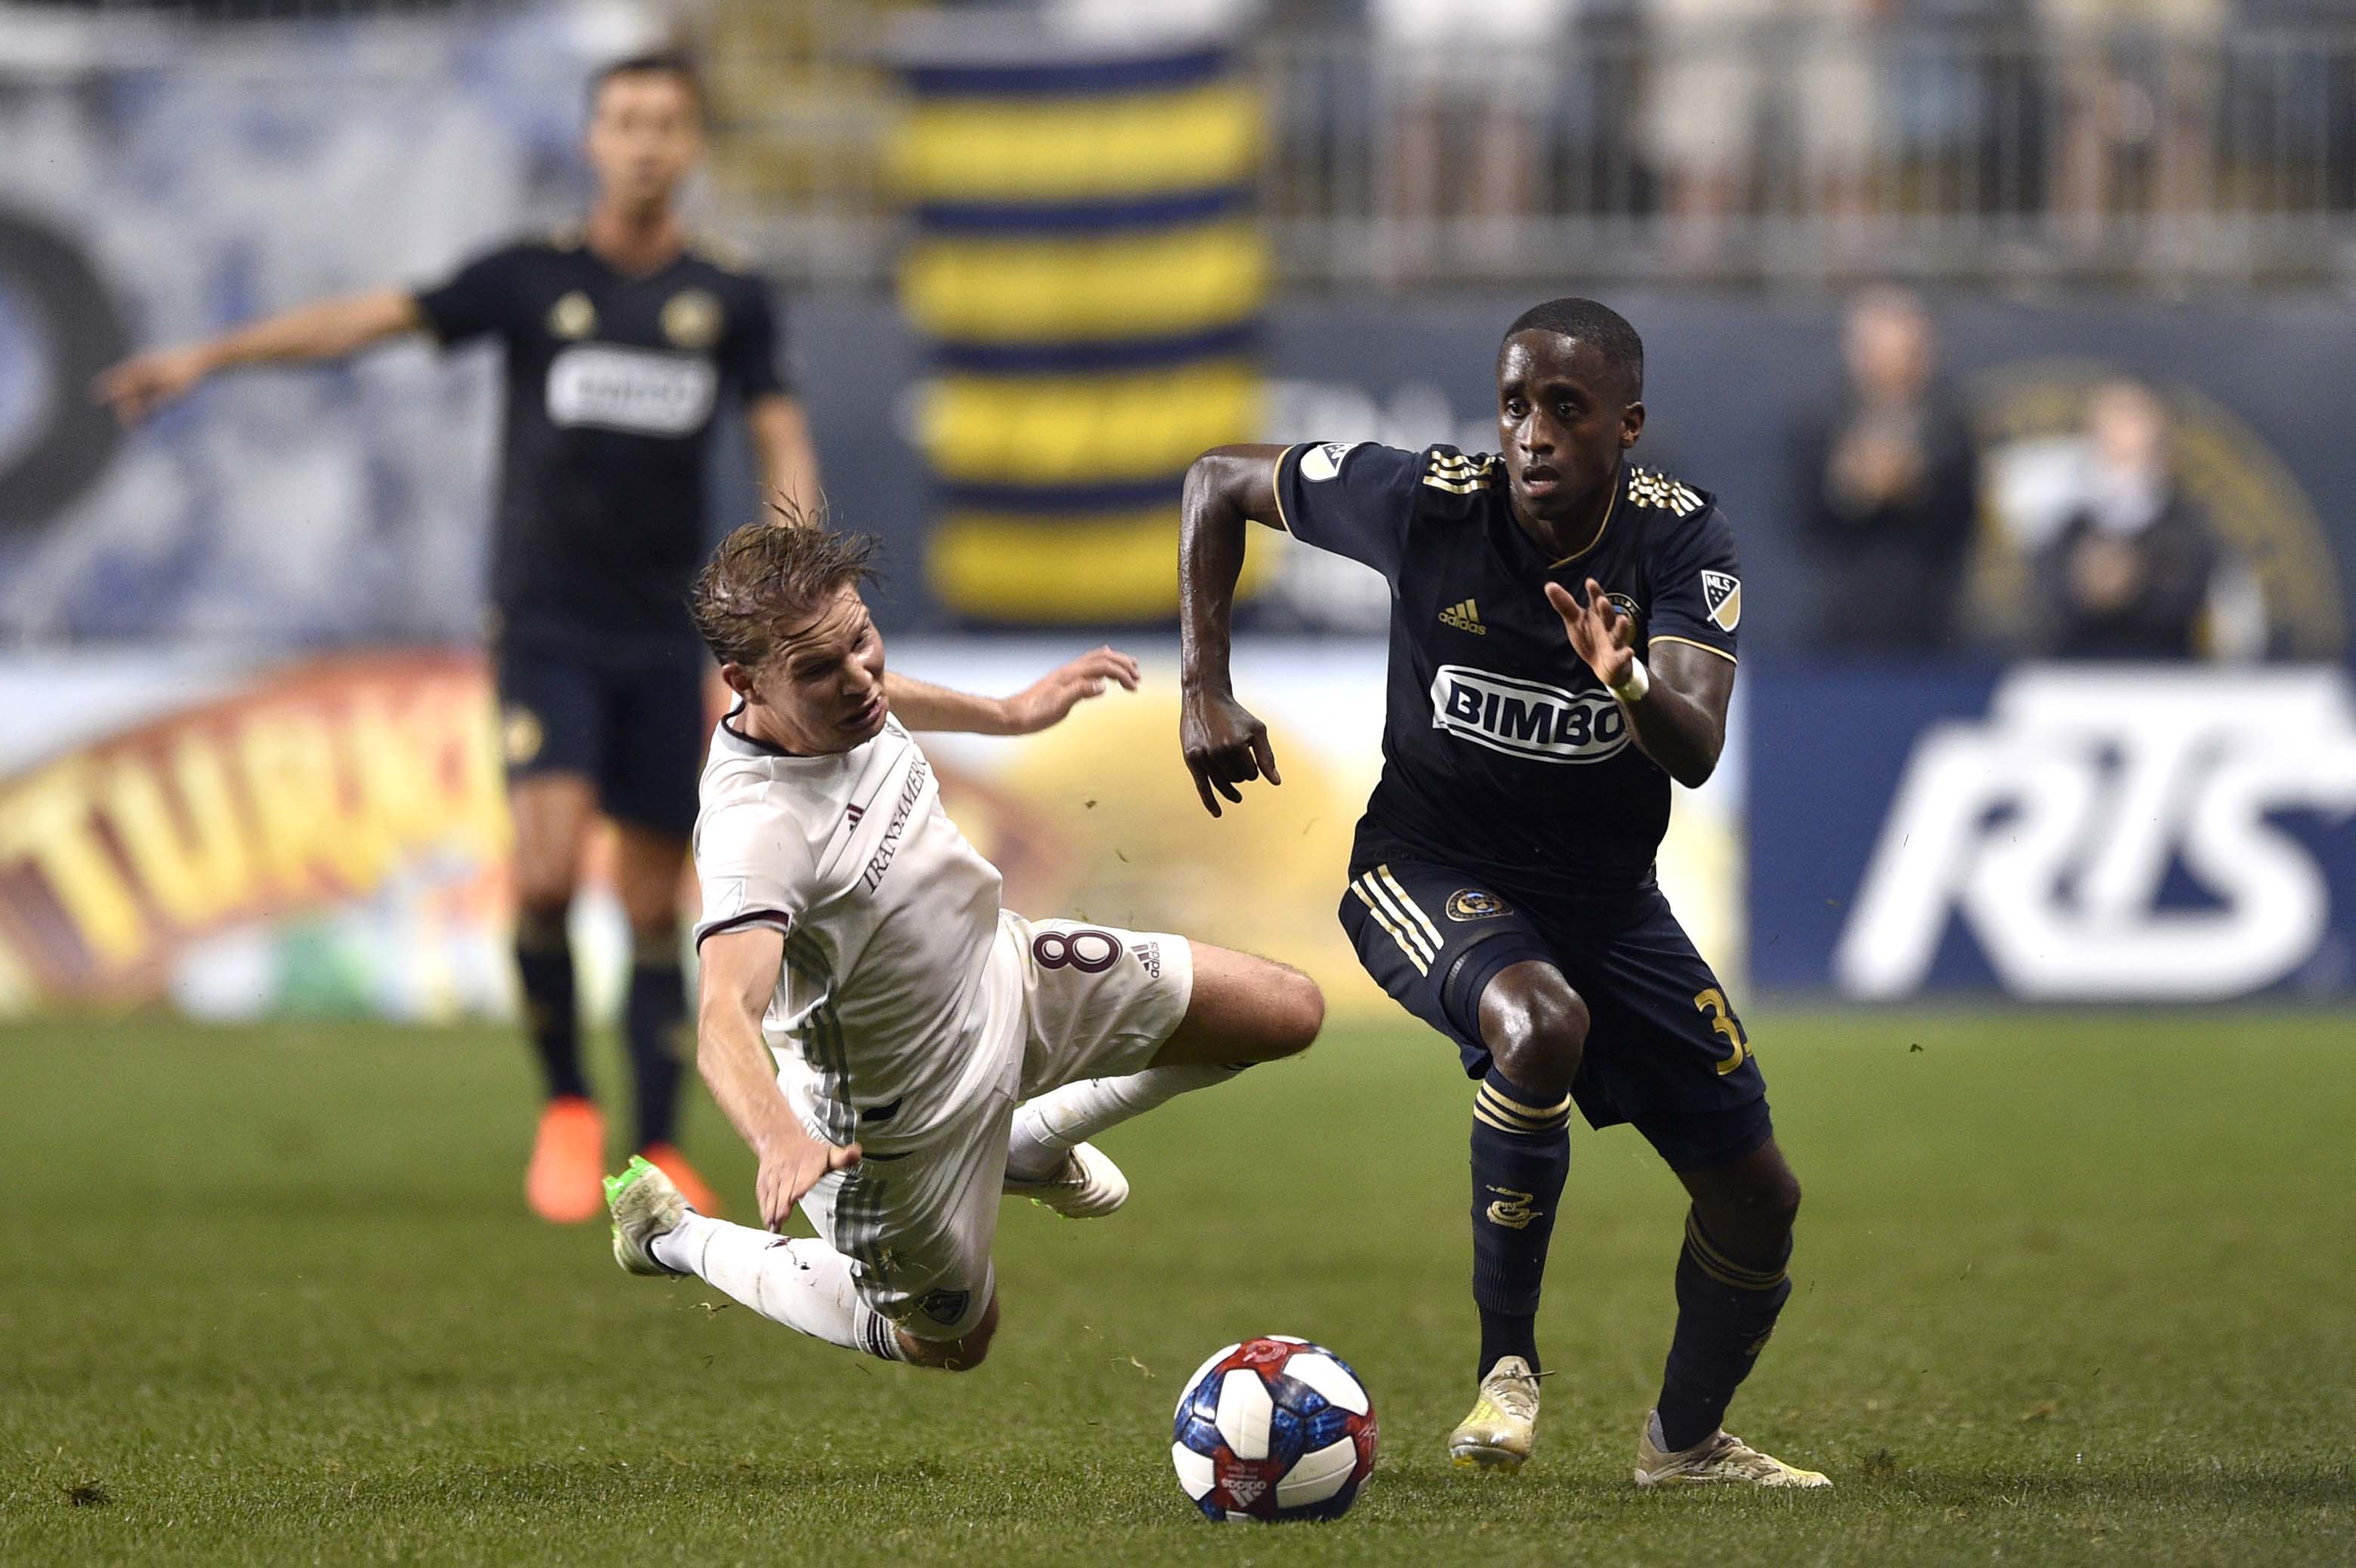 Five Thoughts on Your Second Place* Philadelphia Union